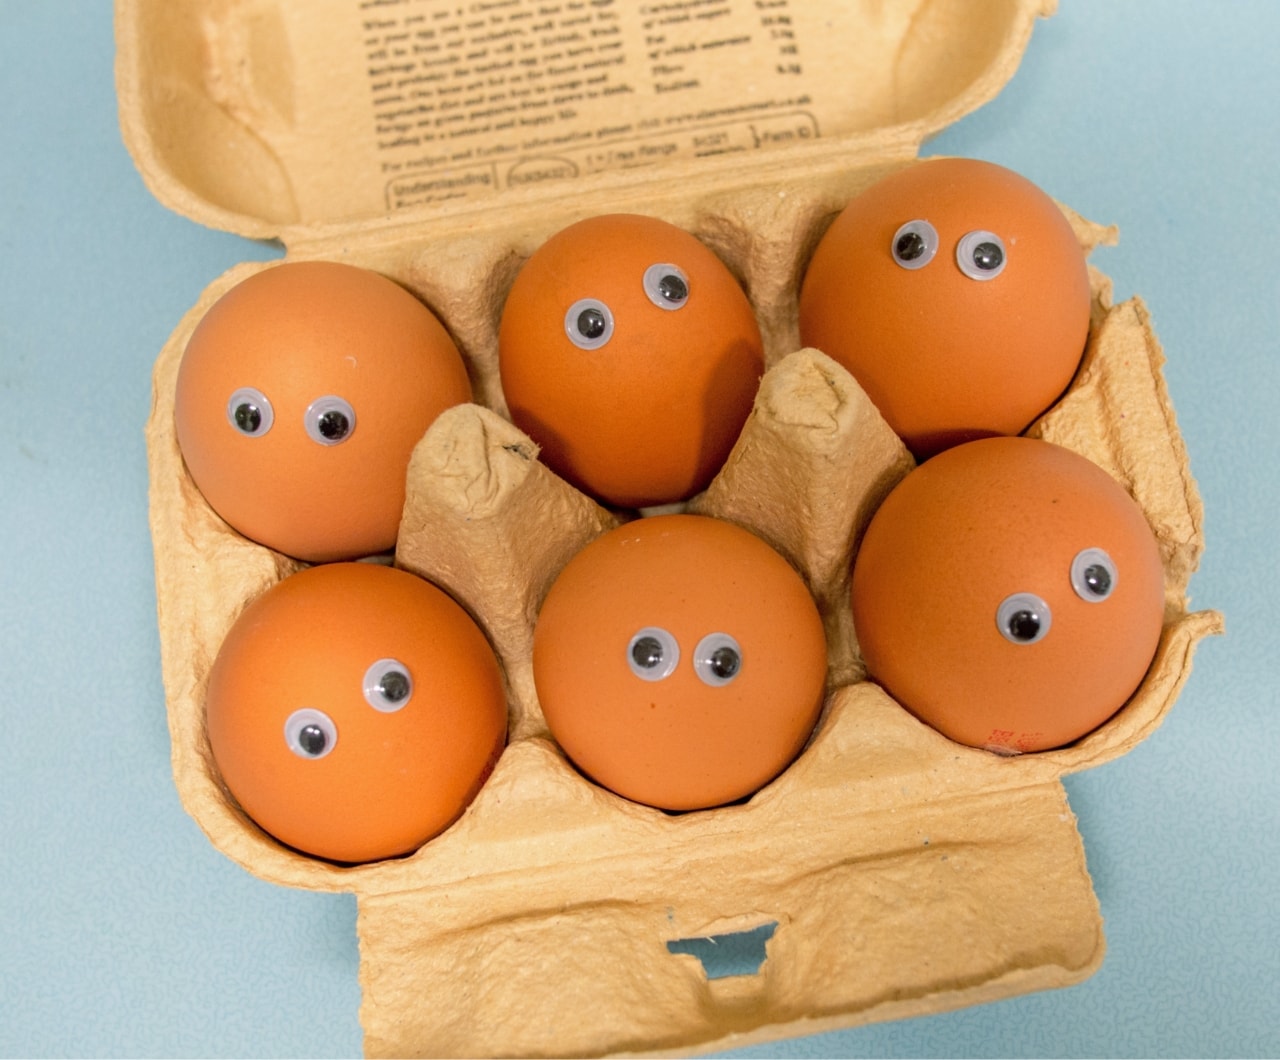 A clutch of egges with googly eyes